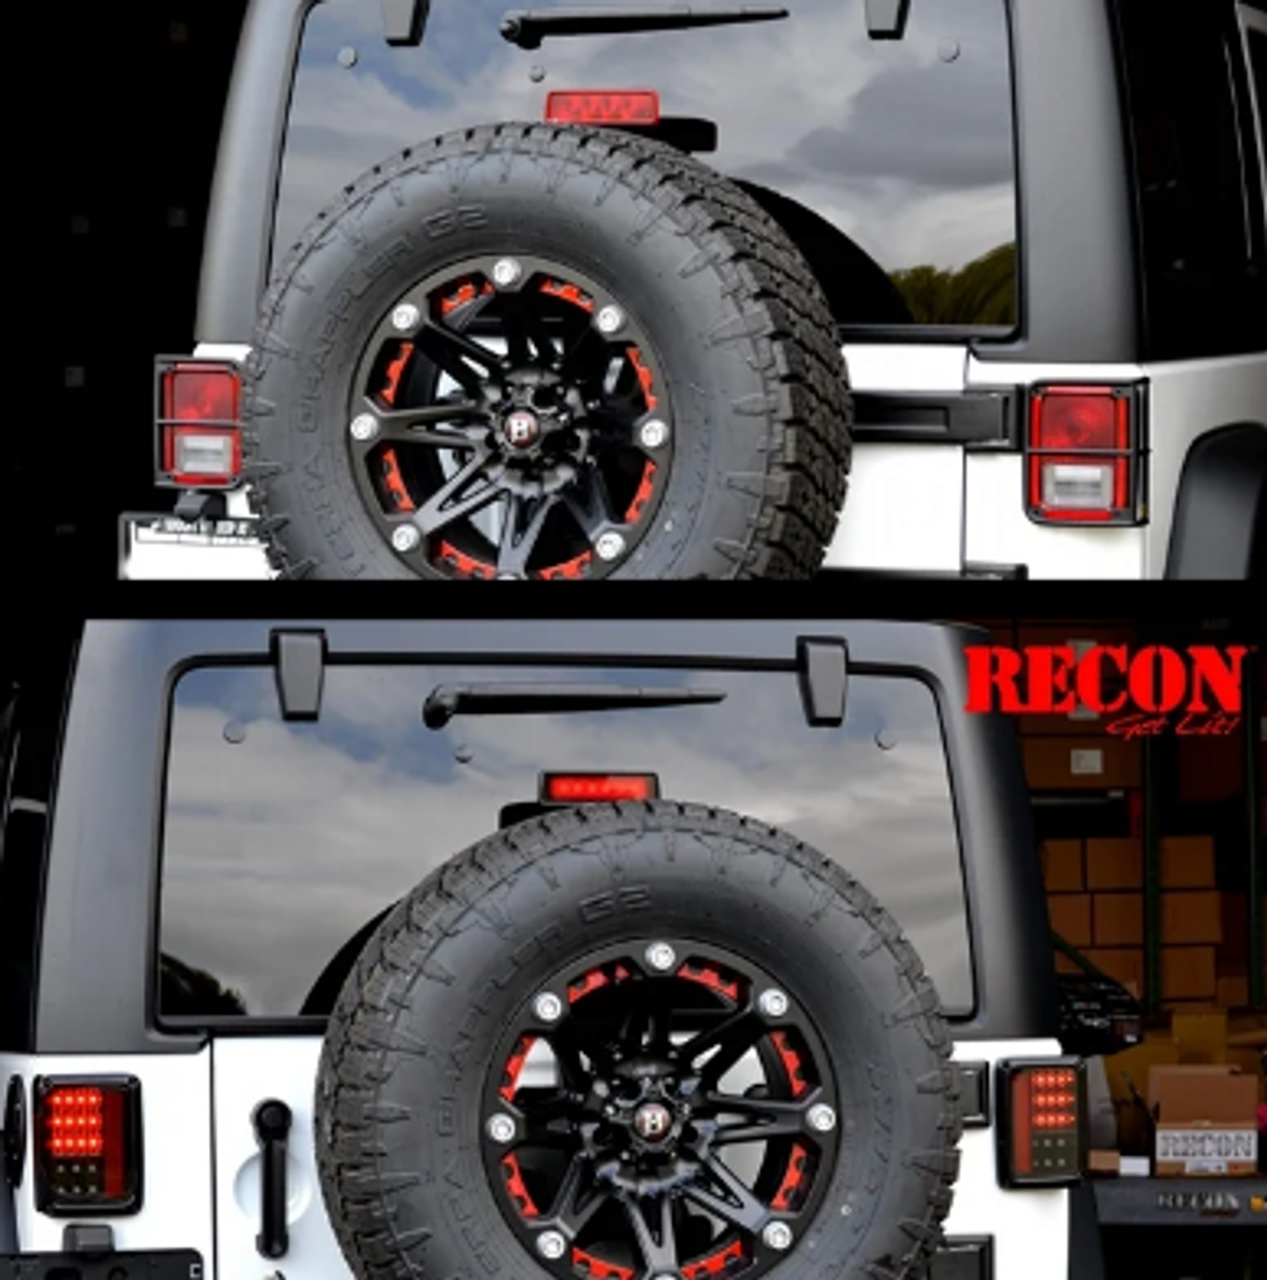 Recon 264234CL LED Tail Lights in Clear Lens for Jeep Wrangler JK 2007-2018